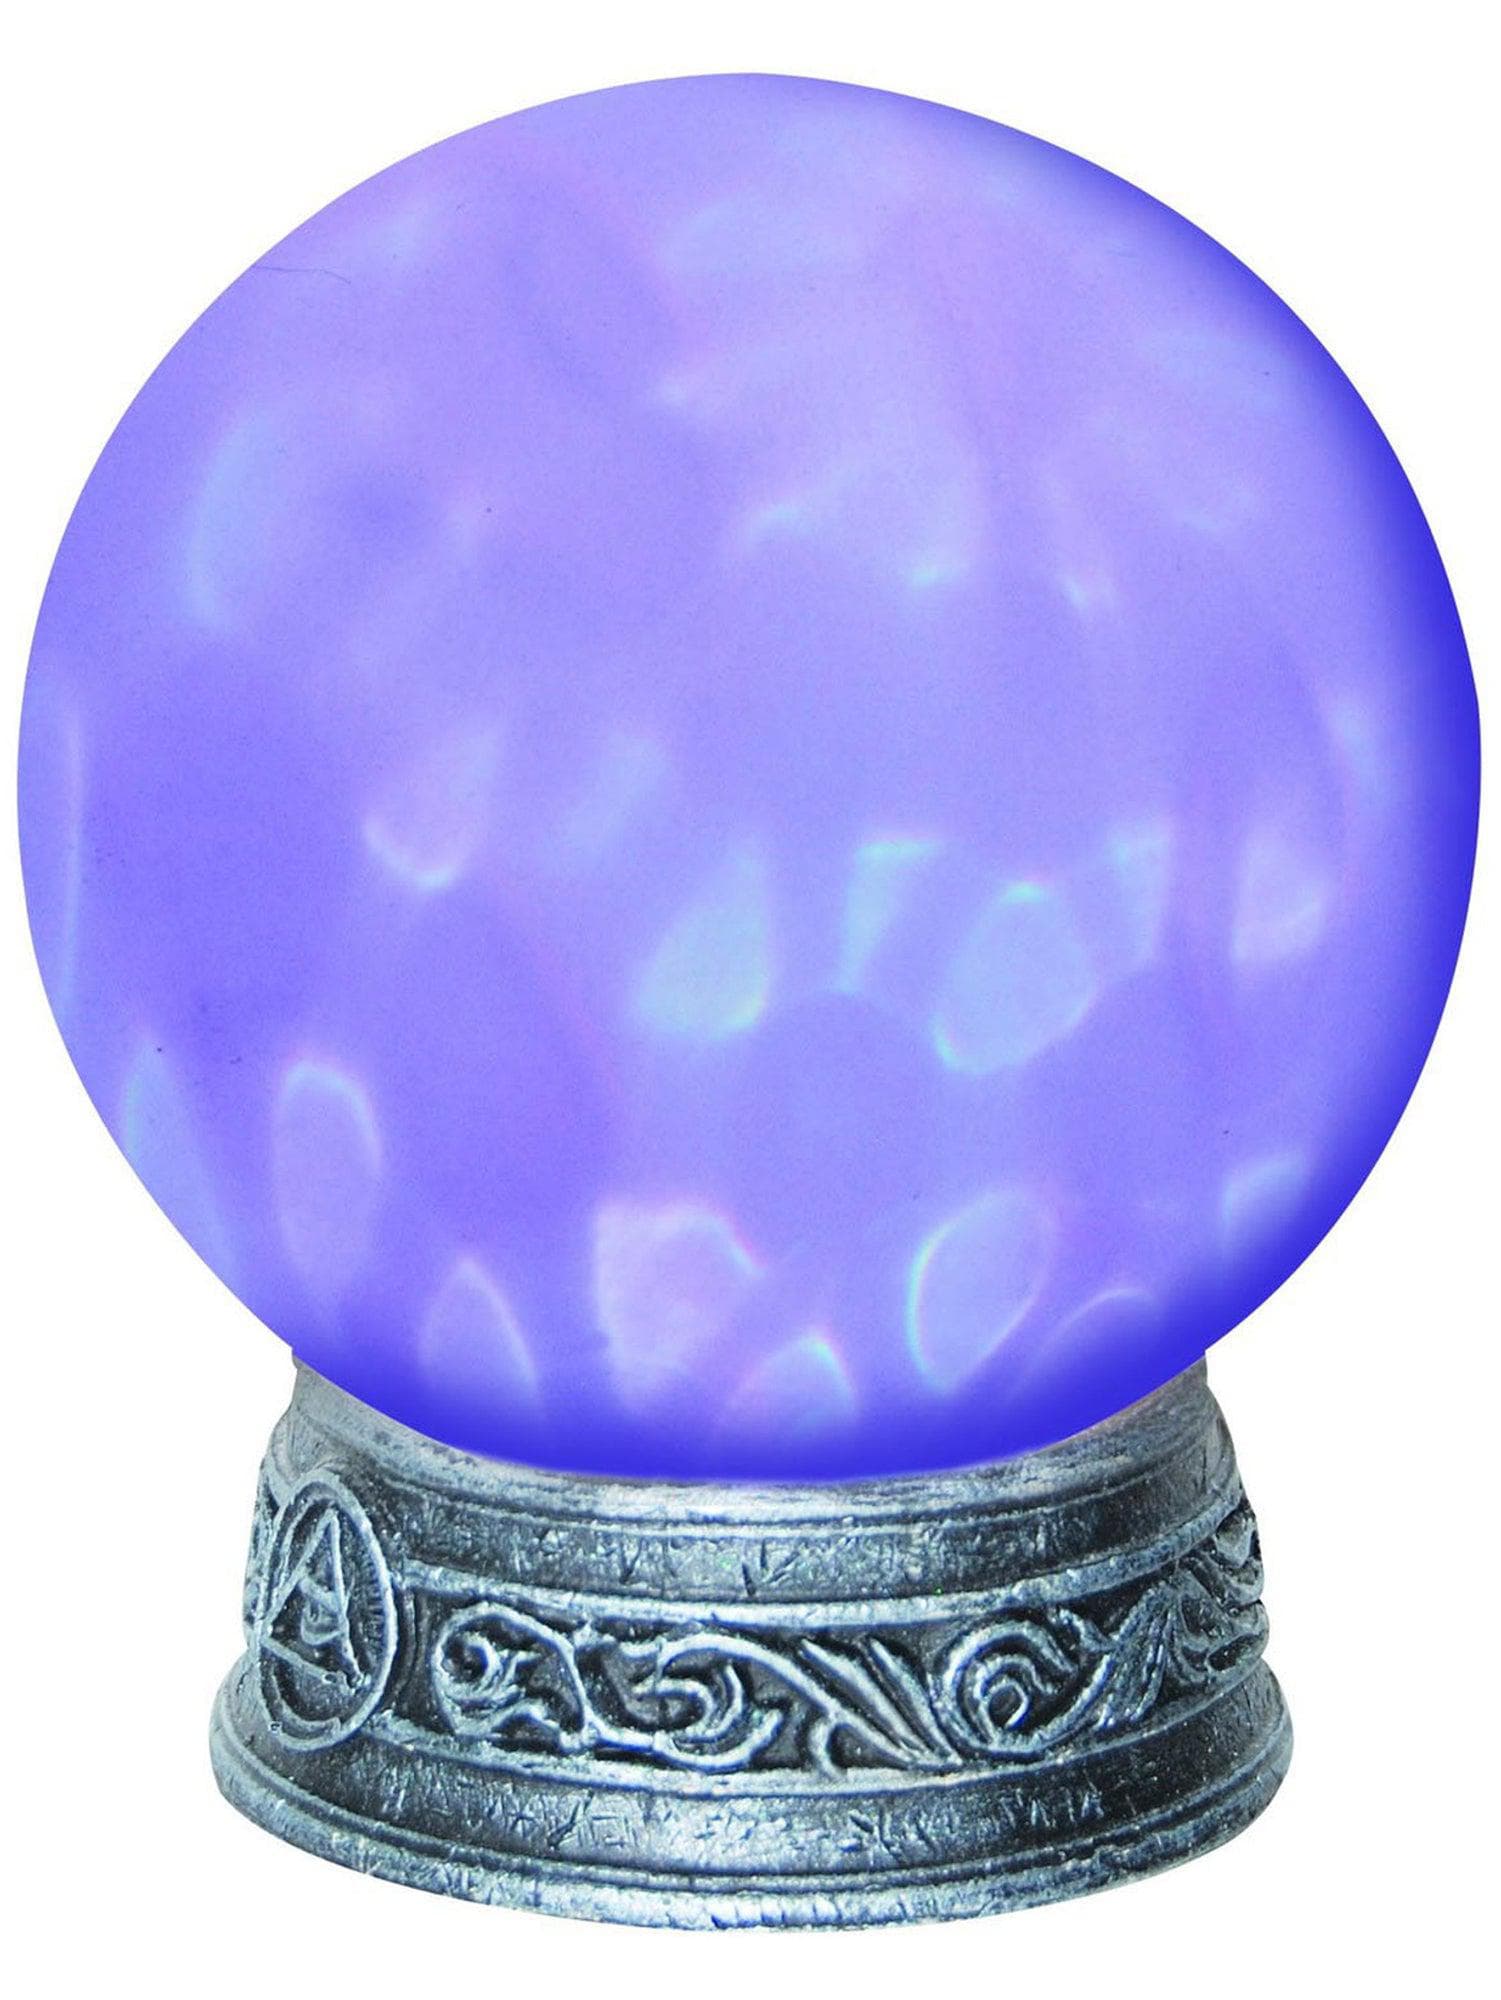 8 Inch Light Up Crystal Ball Prop - costumes.com